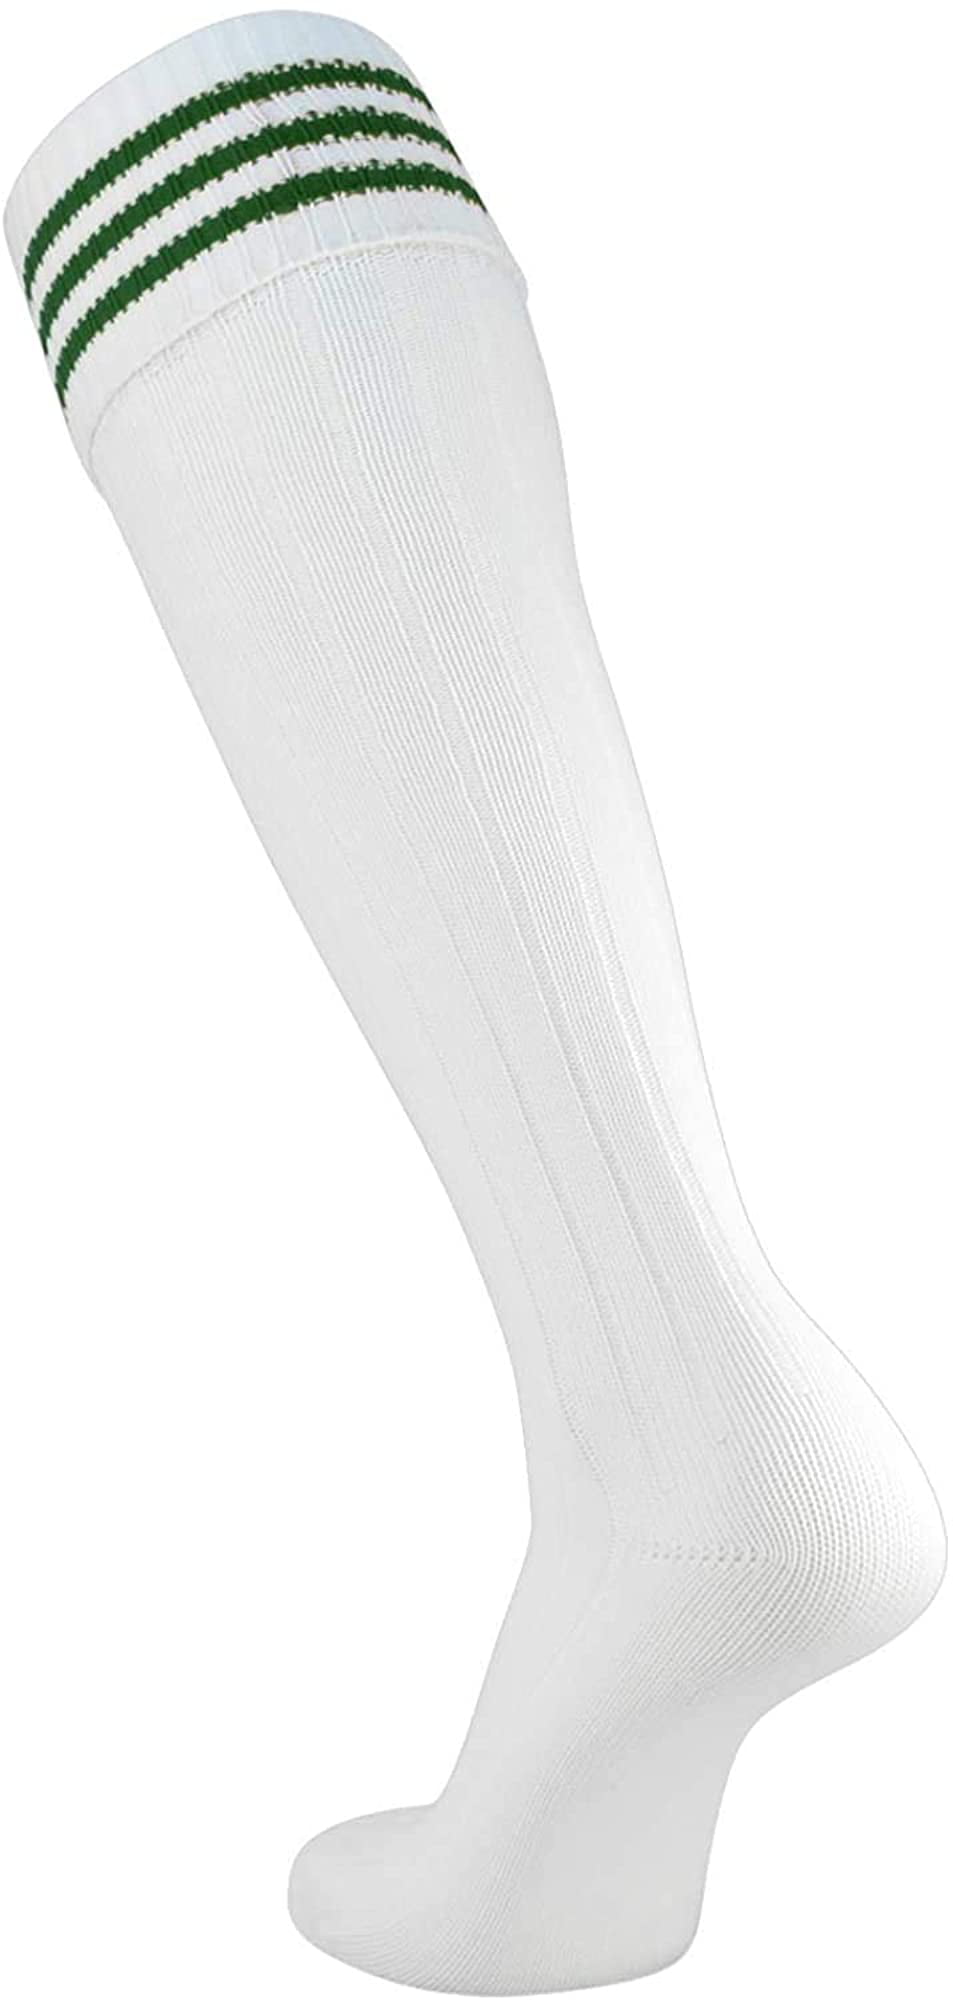 Euro Style 3 Stripe Soccer Socks with Fold Down Top 